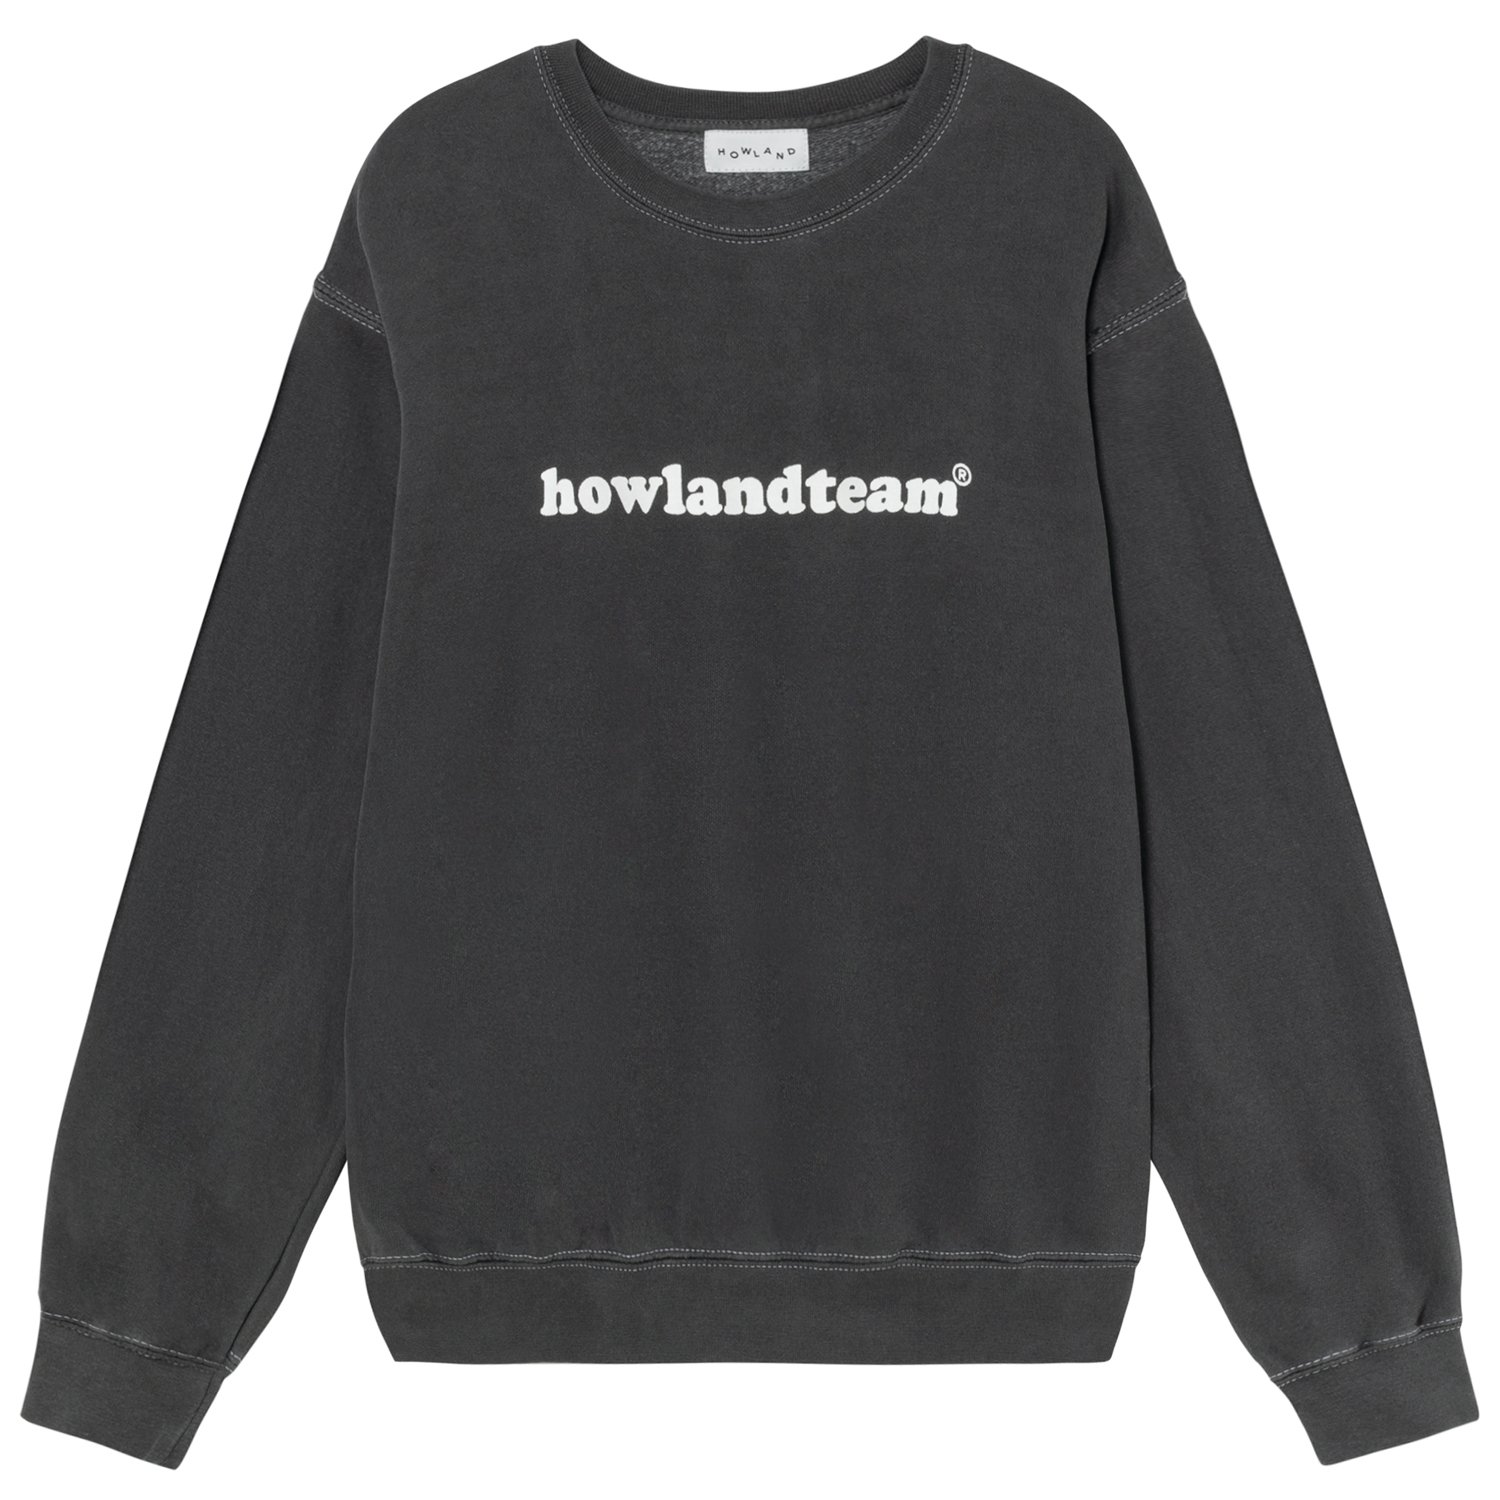 Image of HT WASHED SWEATER